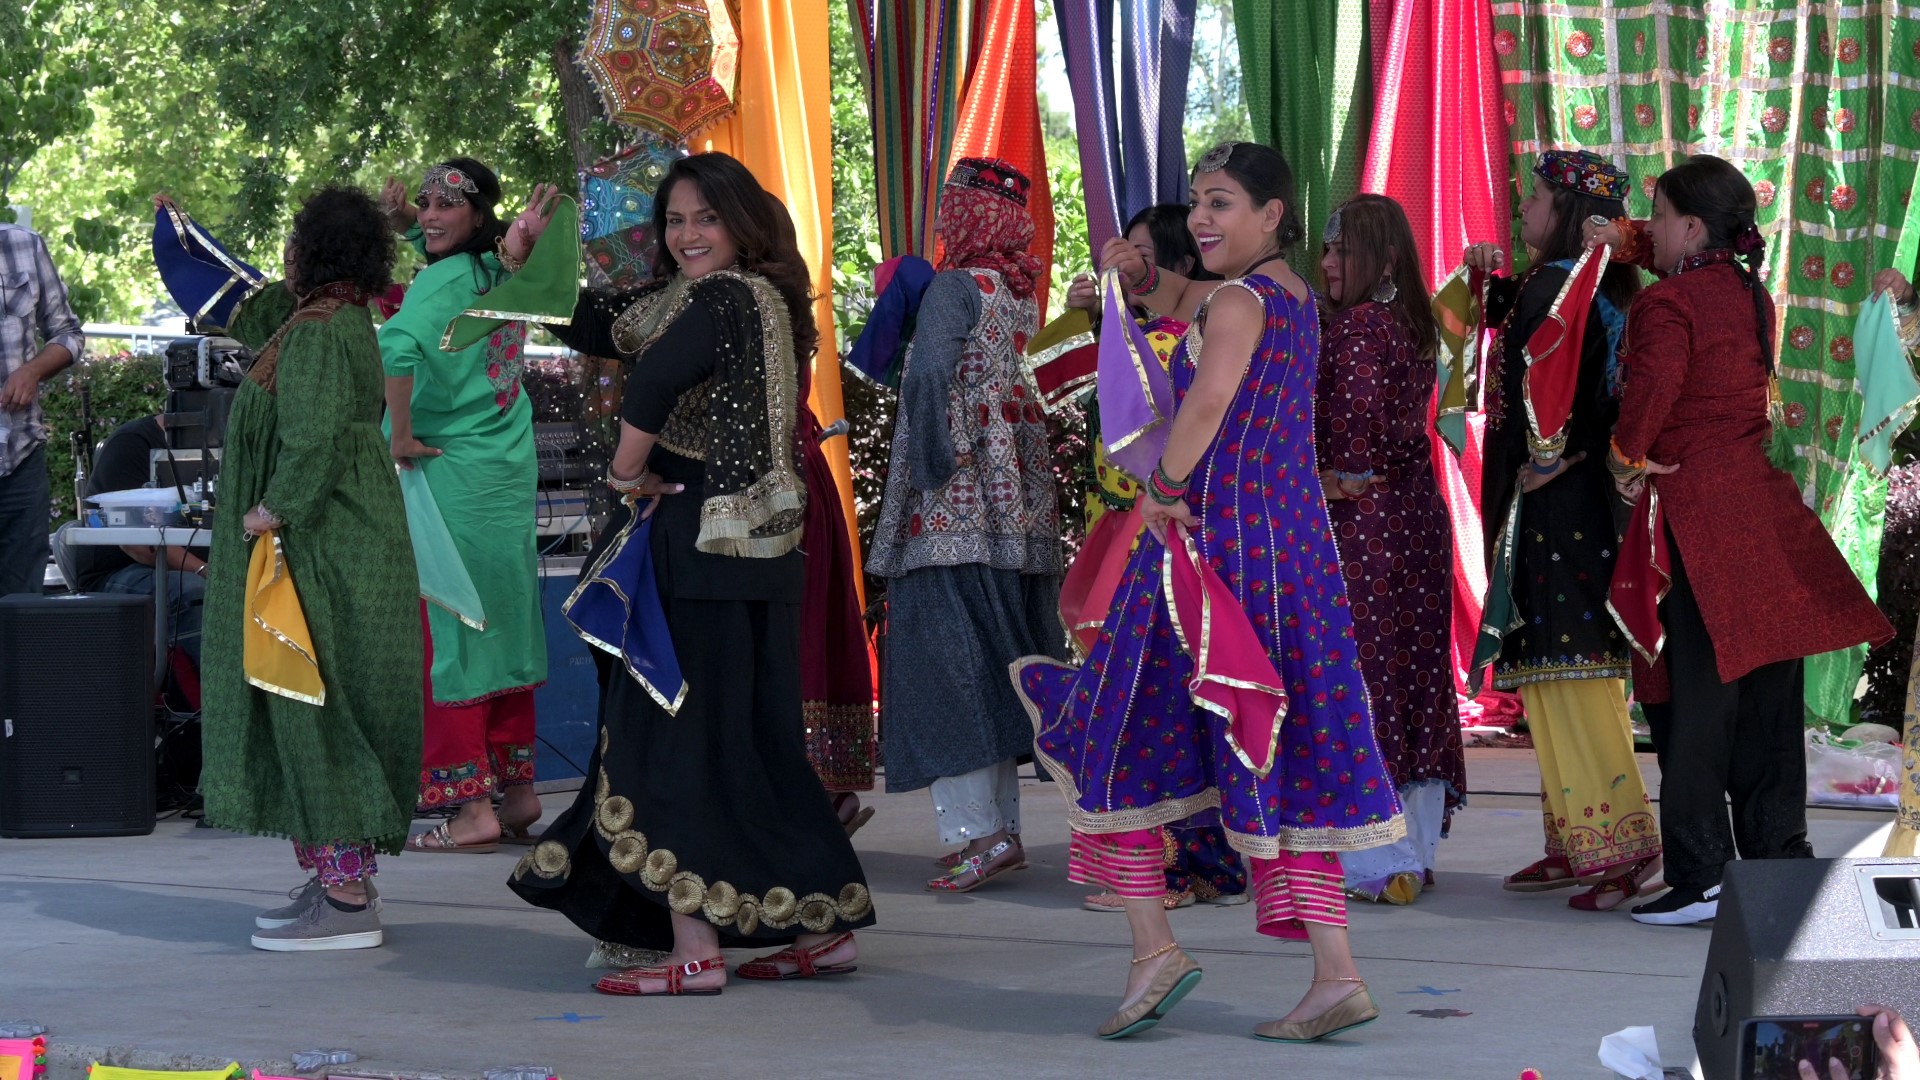 The Pakistan Cultural Festival features traditional street food, handcrafted items, live music and performances, clothing and jewelry vendors and more!